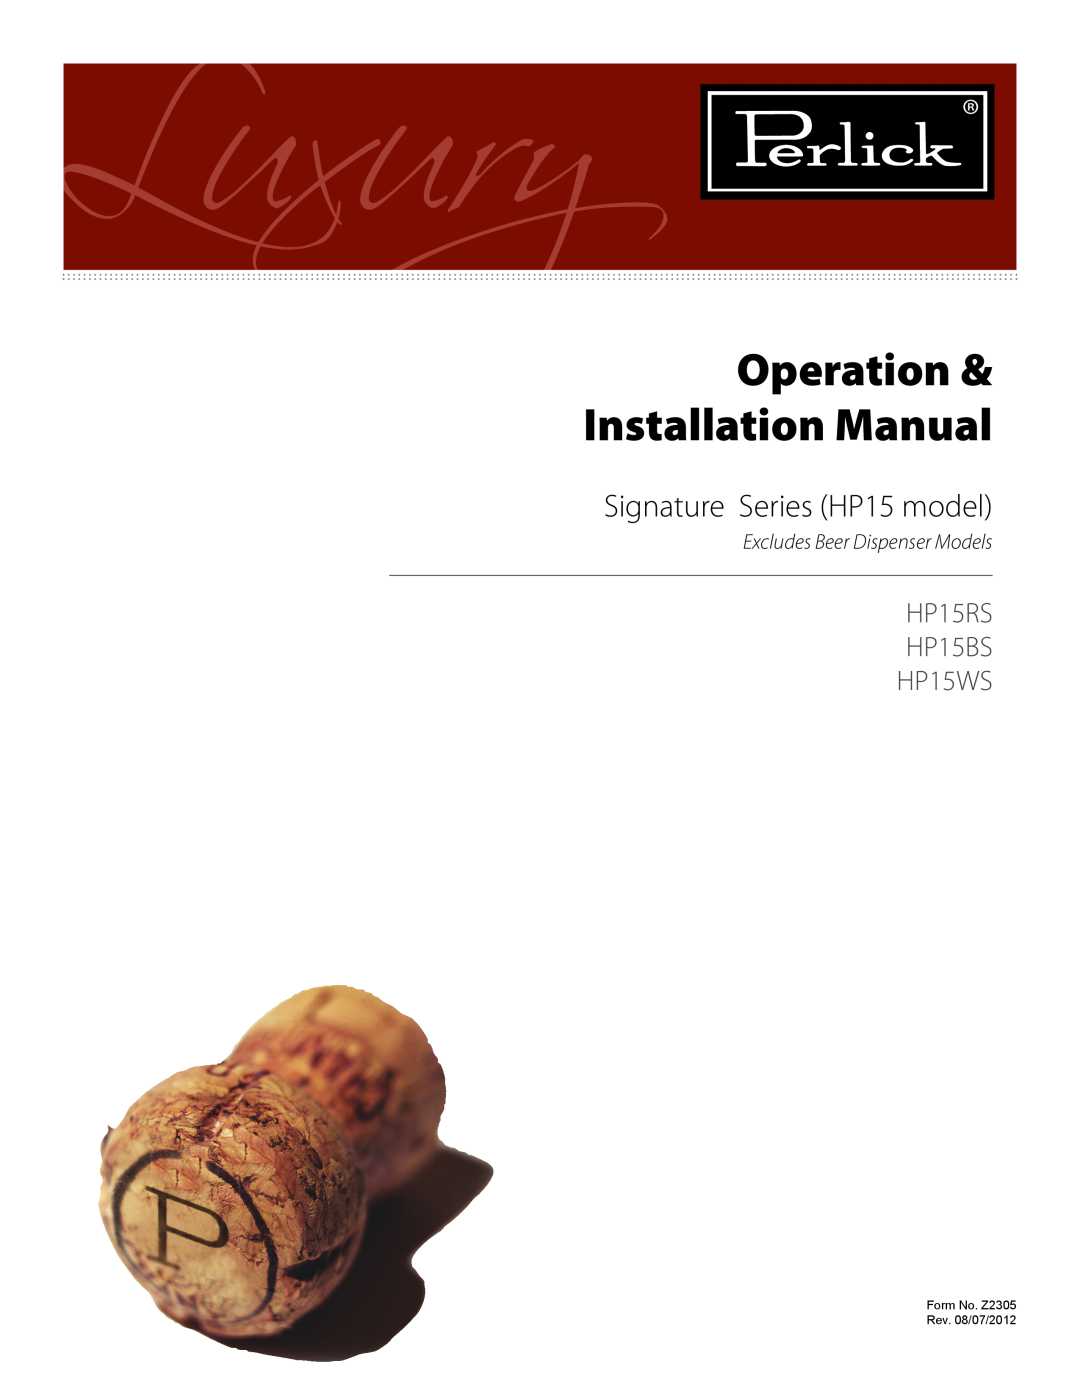 Perlick manual Luxury, Operation & Installation Manual, Signature Series HP15 model, HP15RS HP15BS HP15WS 